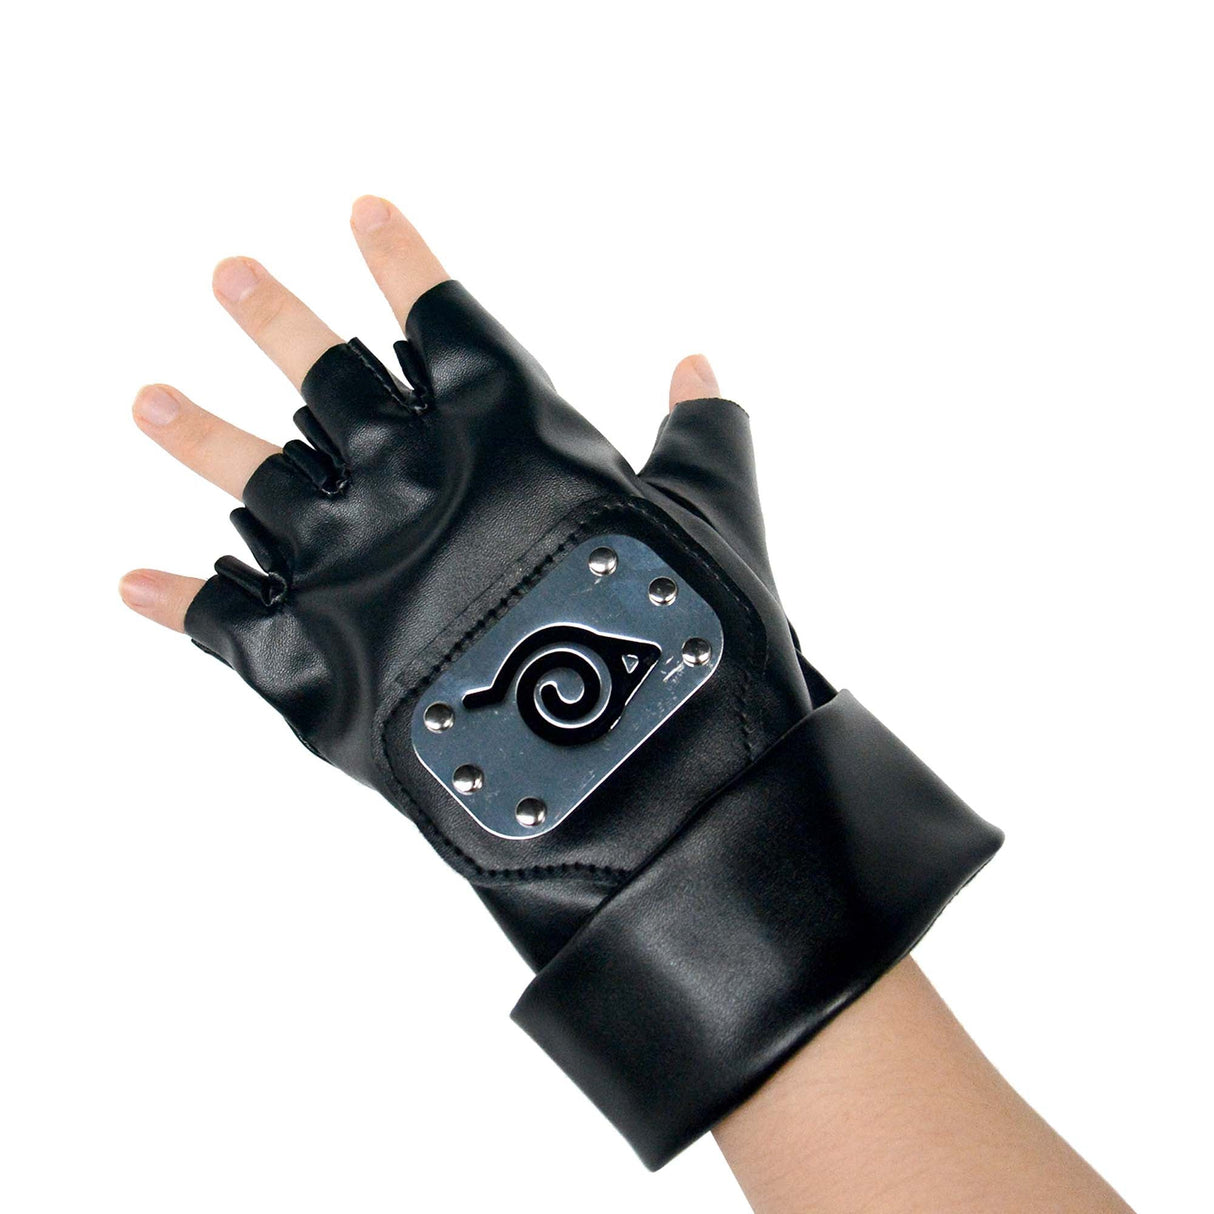 SHENZHEN PARTYGEARS DEVELOPMENT CO. LTD Costumes Accessories The Copy Ninja Gloves for Adults, 2 Count